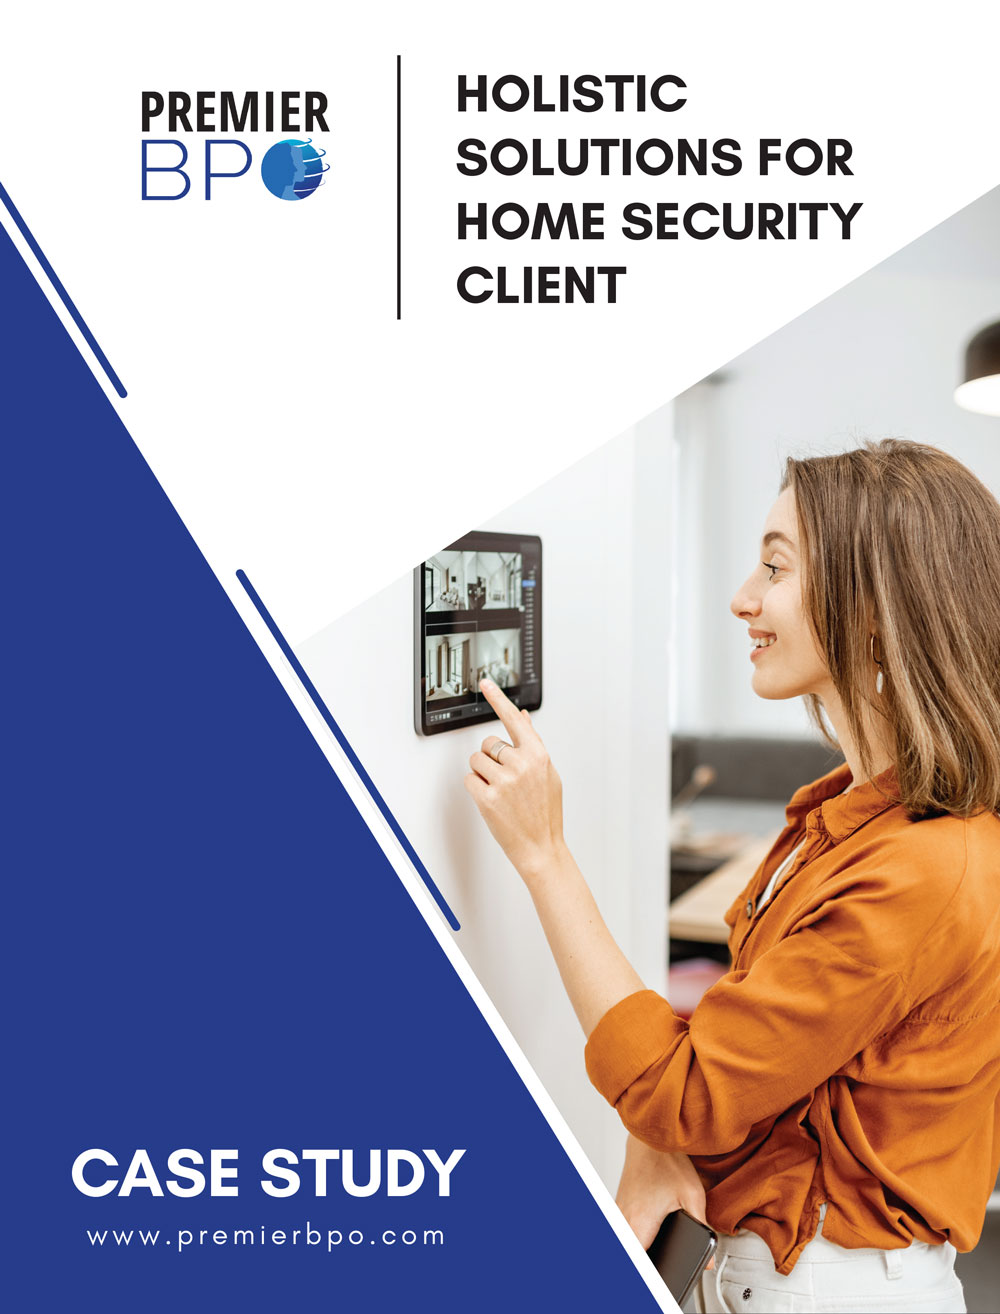 HOLISTIC SOLUTIONS FOR HOME SECURITY CLIENT